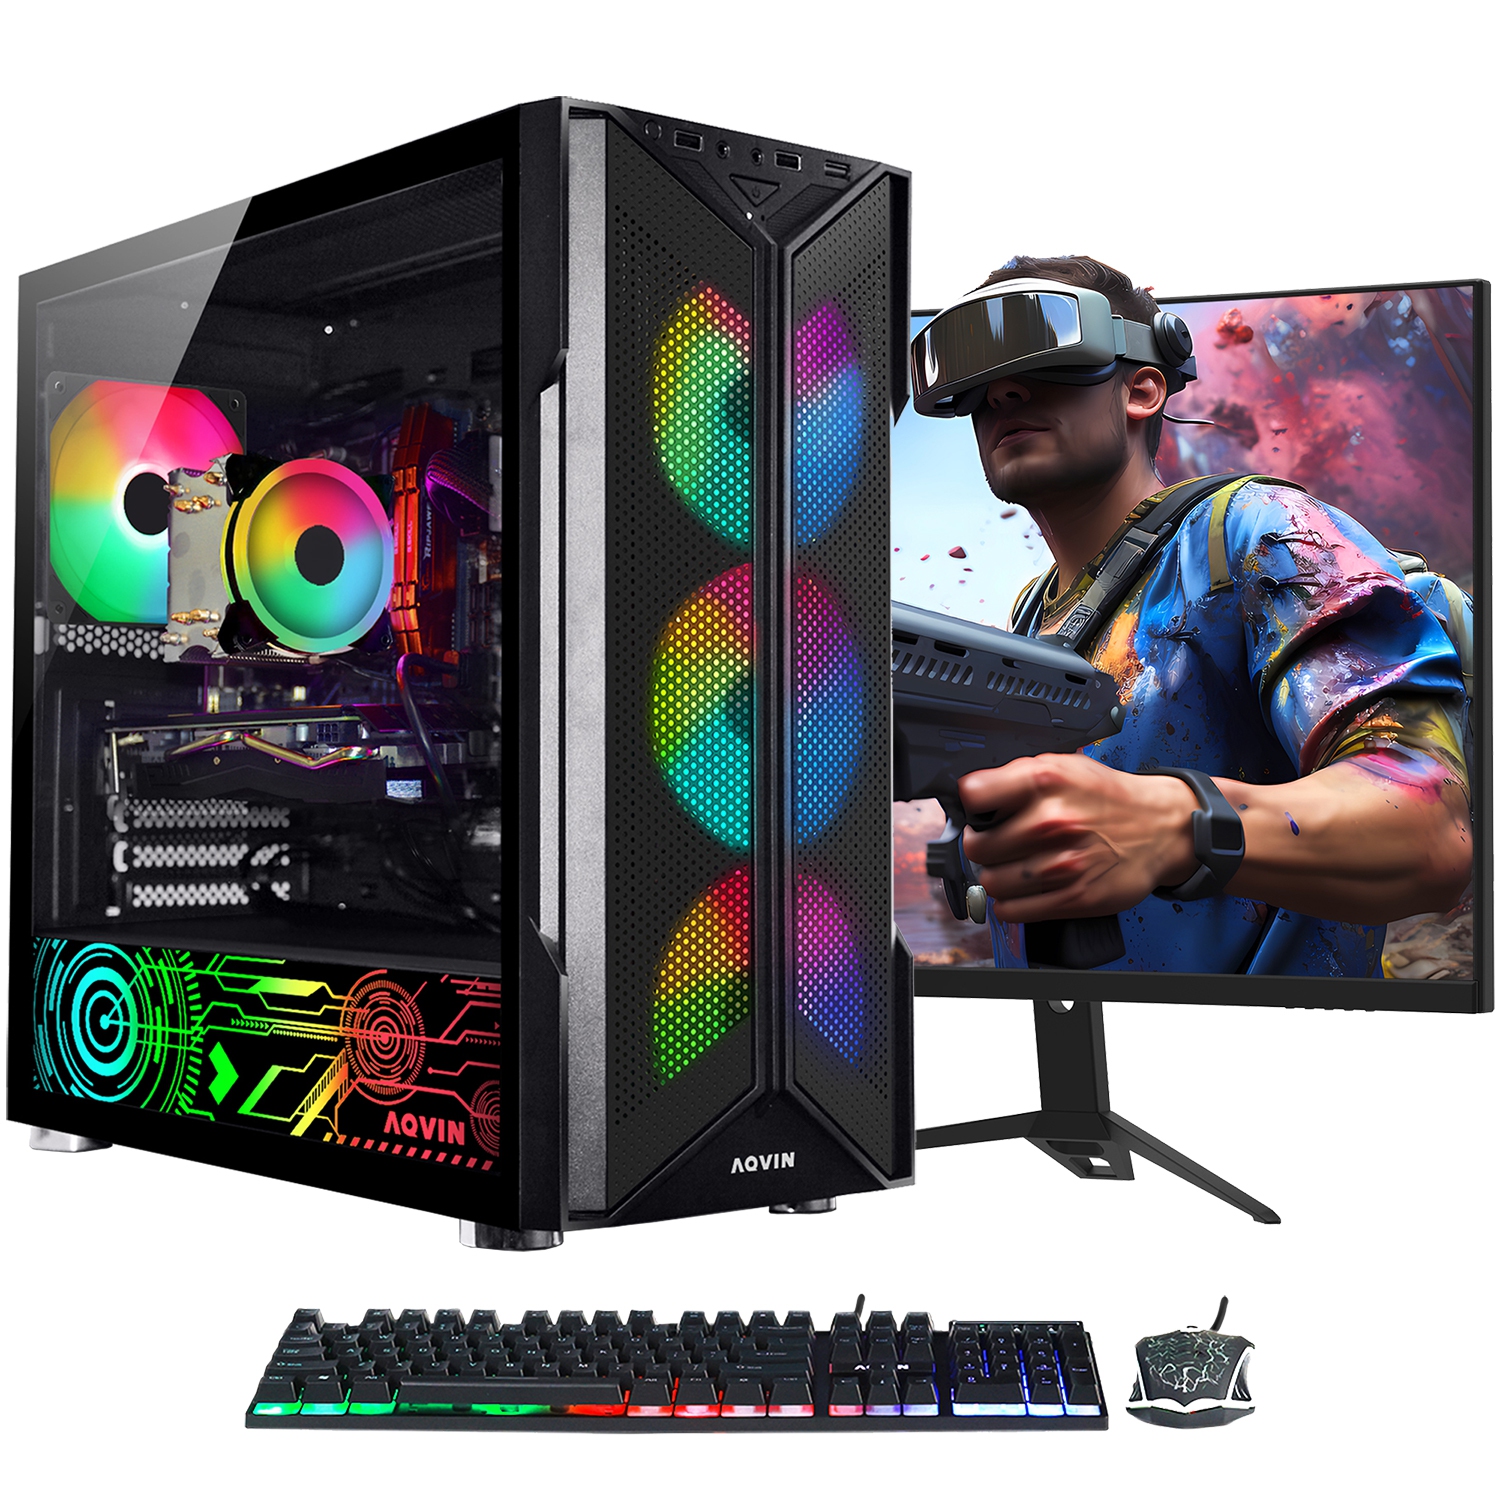 AQVIN-AQ20 Tower Desktop Computer Gaming PC - New 24 inch Curved Gaming Monitor (Intel Core i7/ 32GB RAM/ 2TB SSD/ GeForce GTX 1660 Super 6GB/ Windows 11) - Only at Best Buy